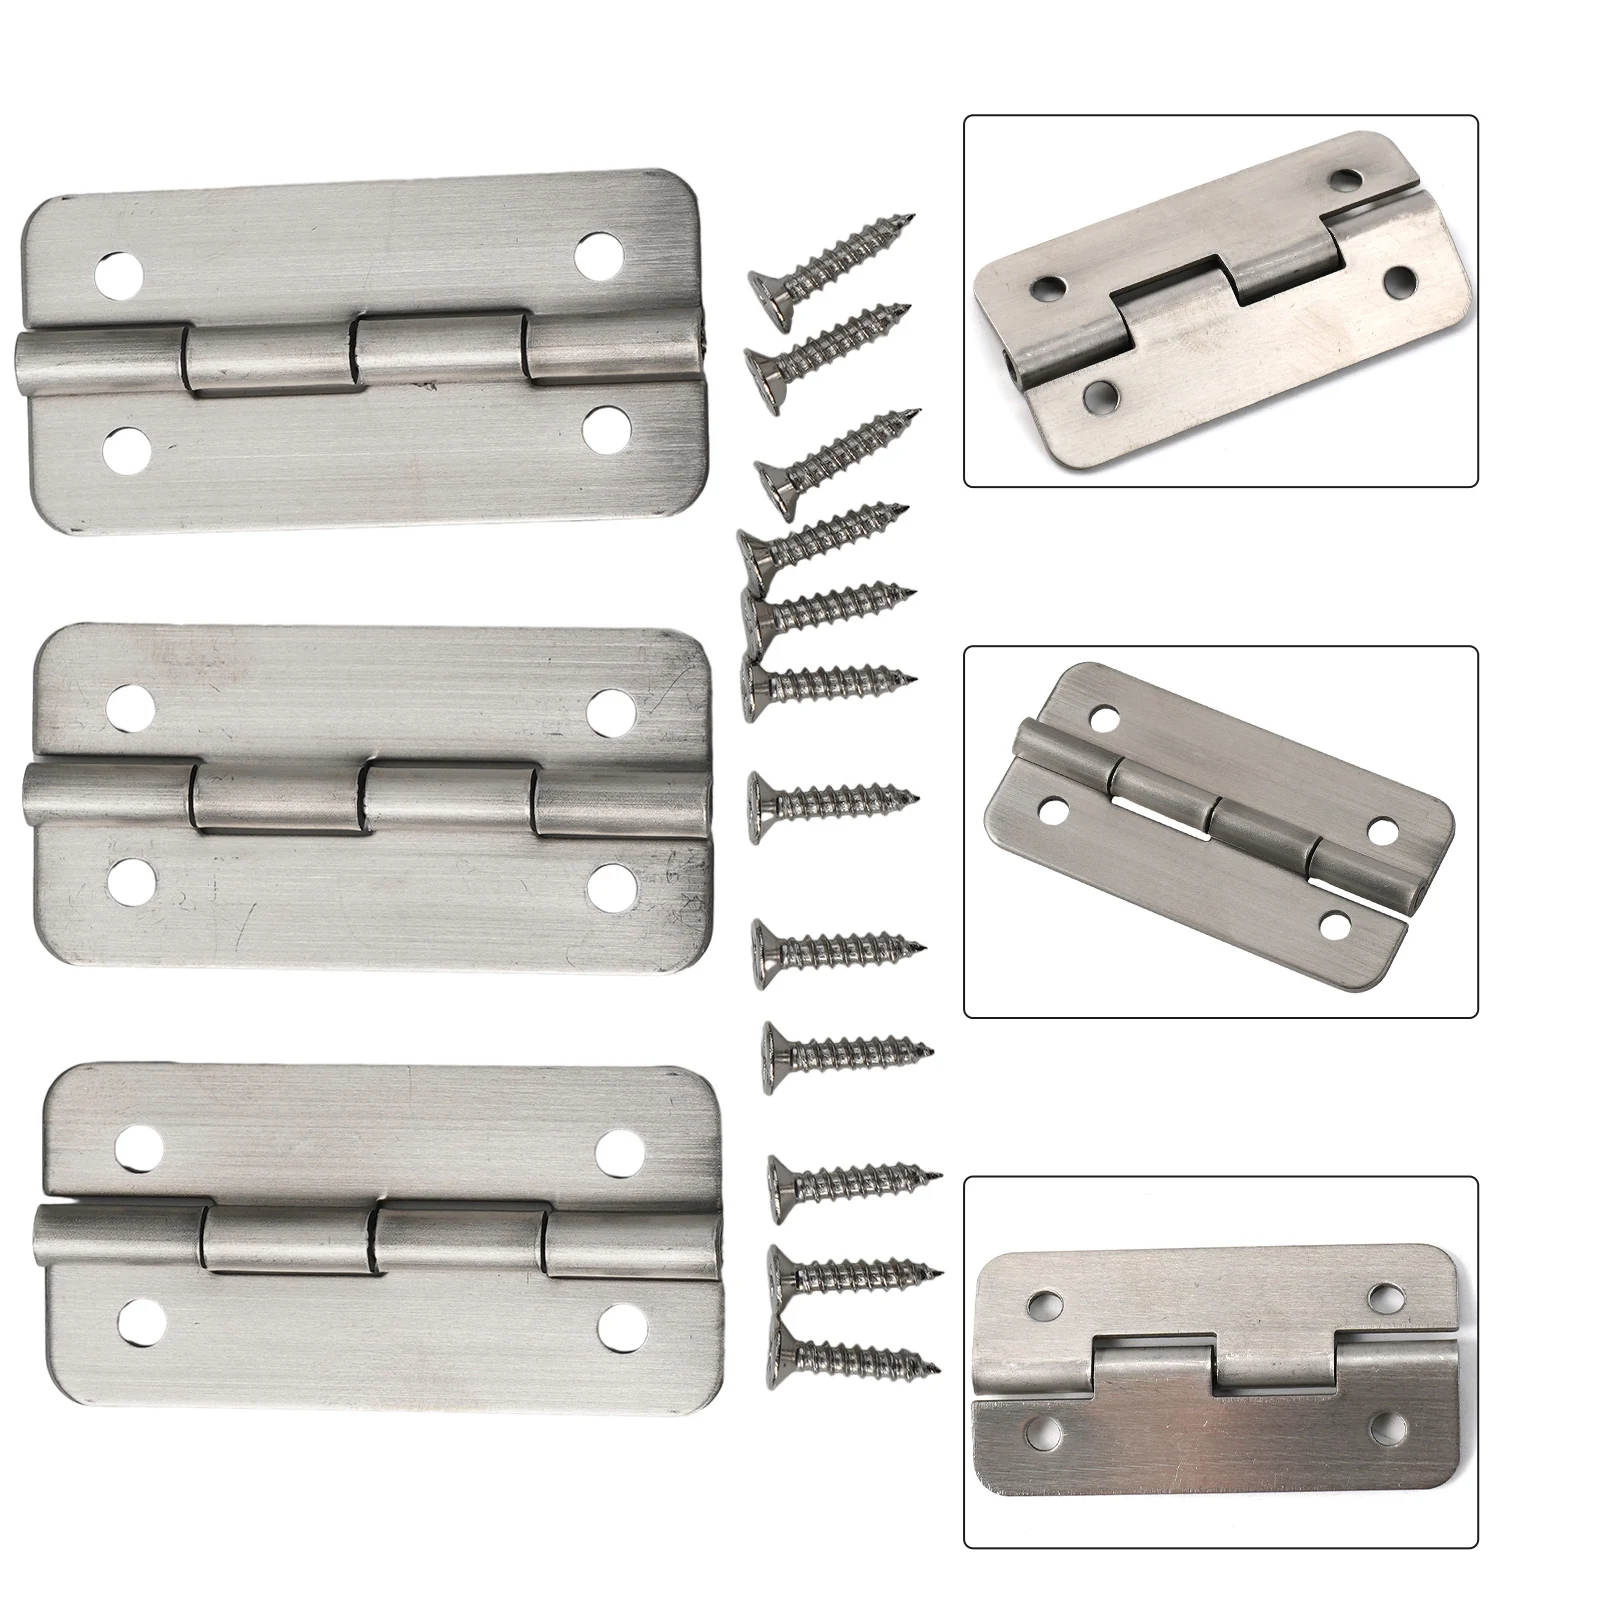 Screws Hinges Home Garden Cooler Cooler Parts For Igloo Garden Tools Hatchets Replacements 304 Stainless Steel 4x metal locking folding table chair leg brackets spring cabinet hinges cupboard door furniture hardware with screws no drilling